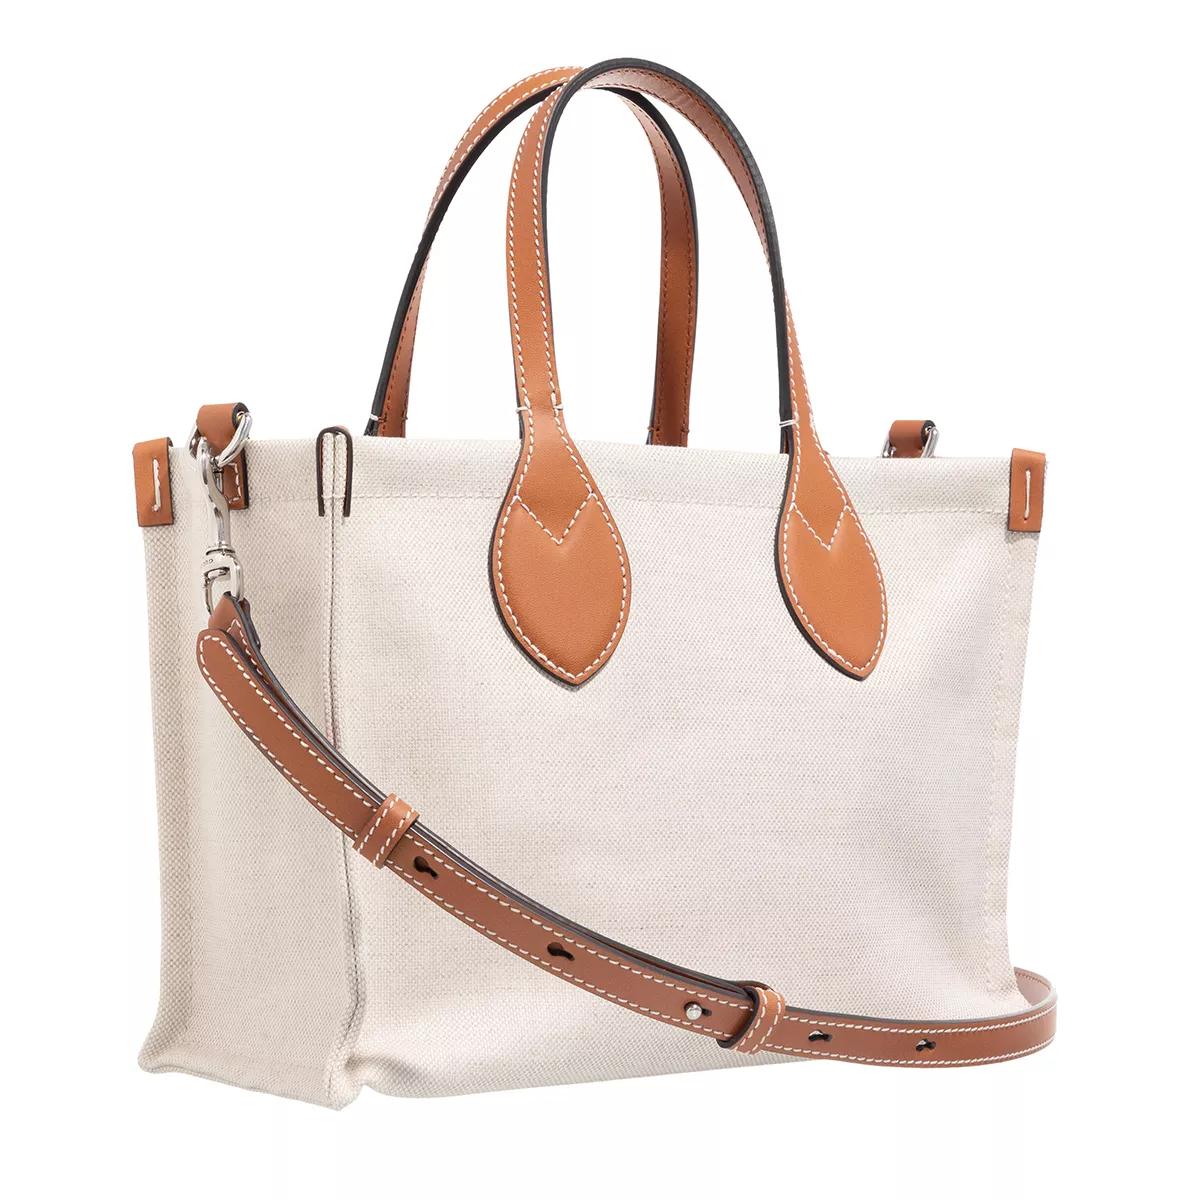 Gucci Totes Small Printed Tote Bag in beige